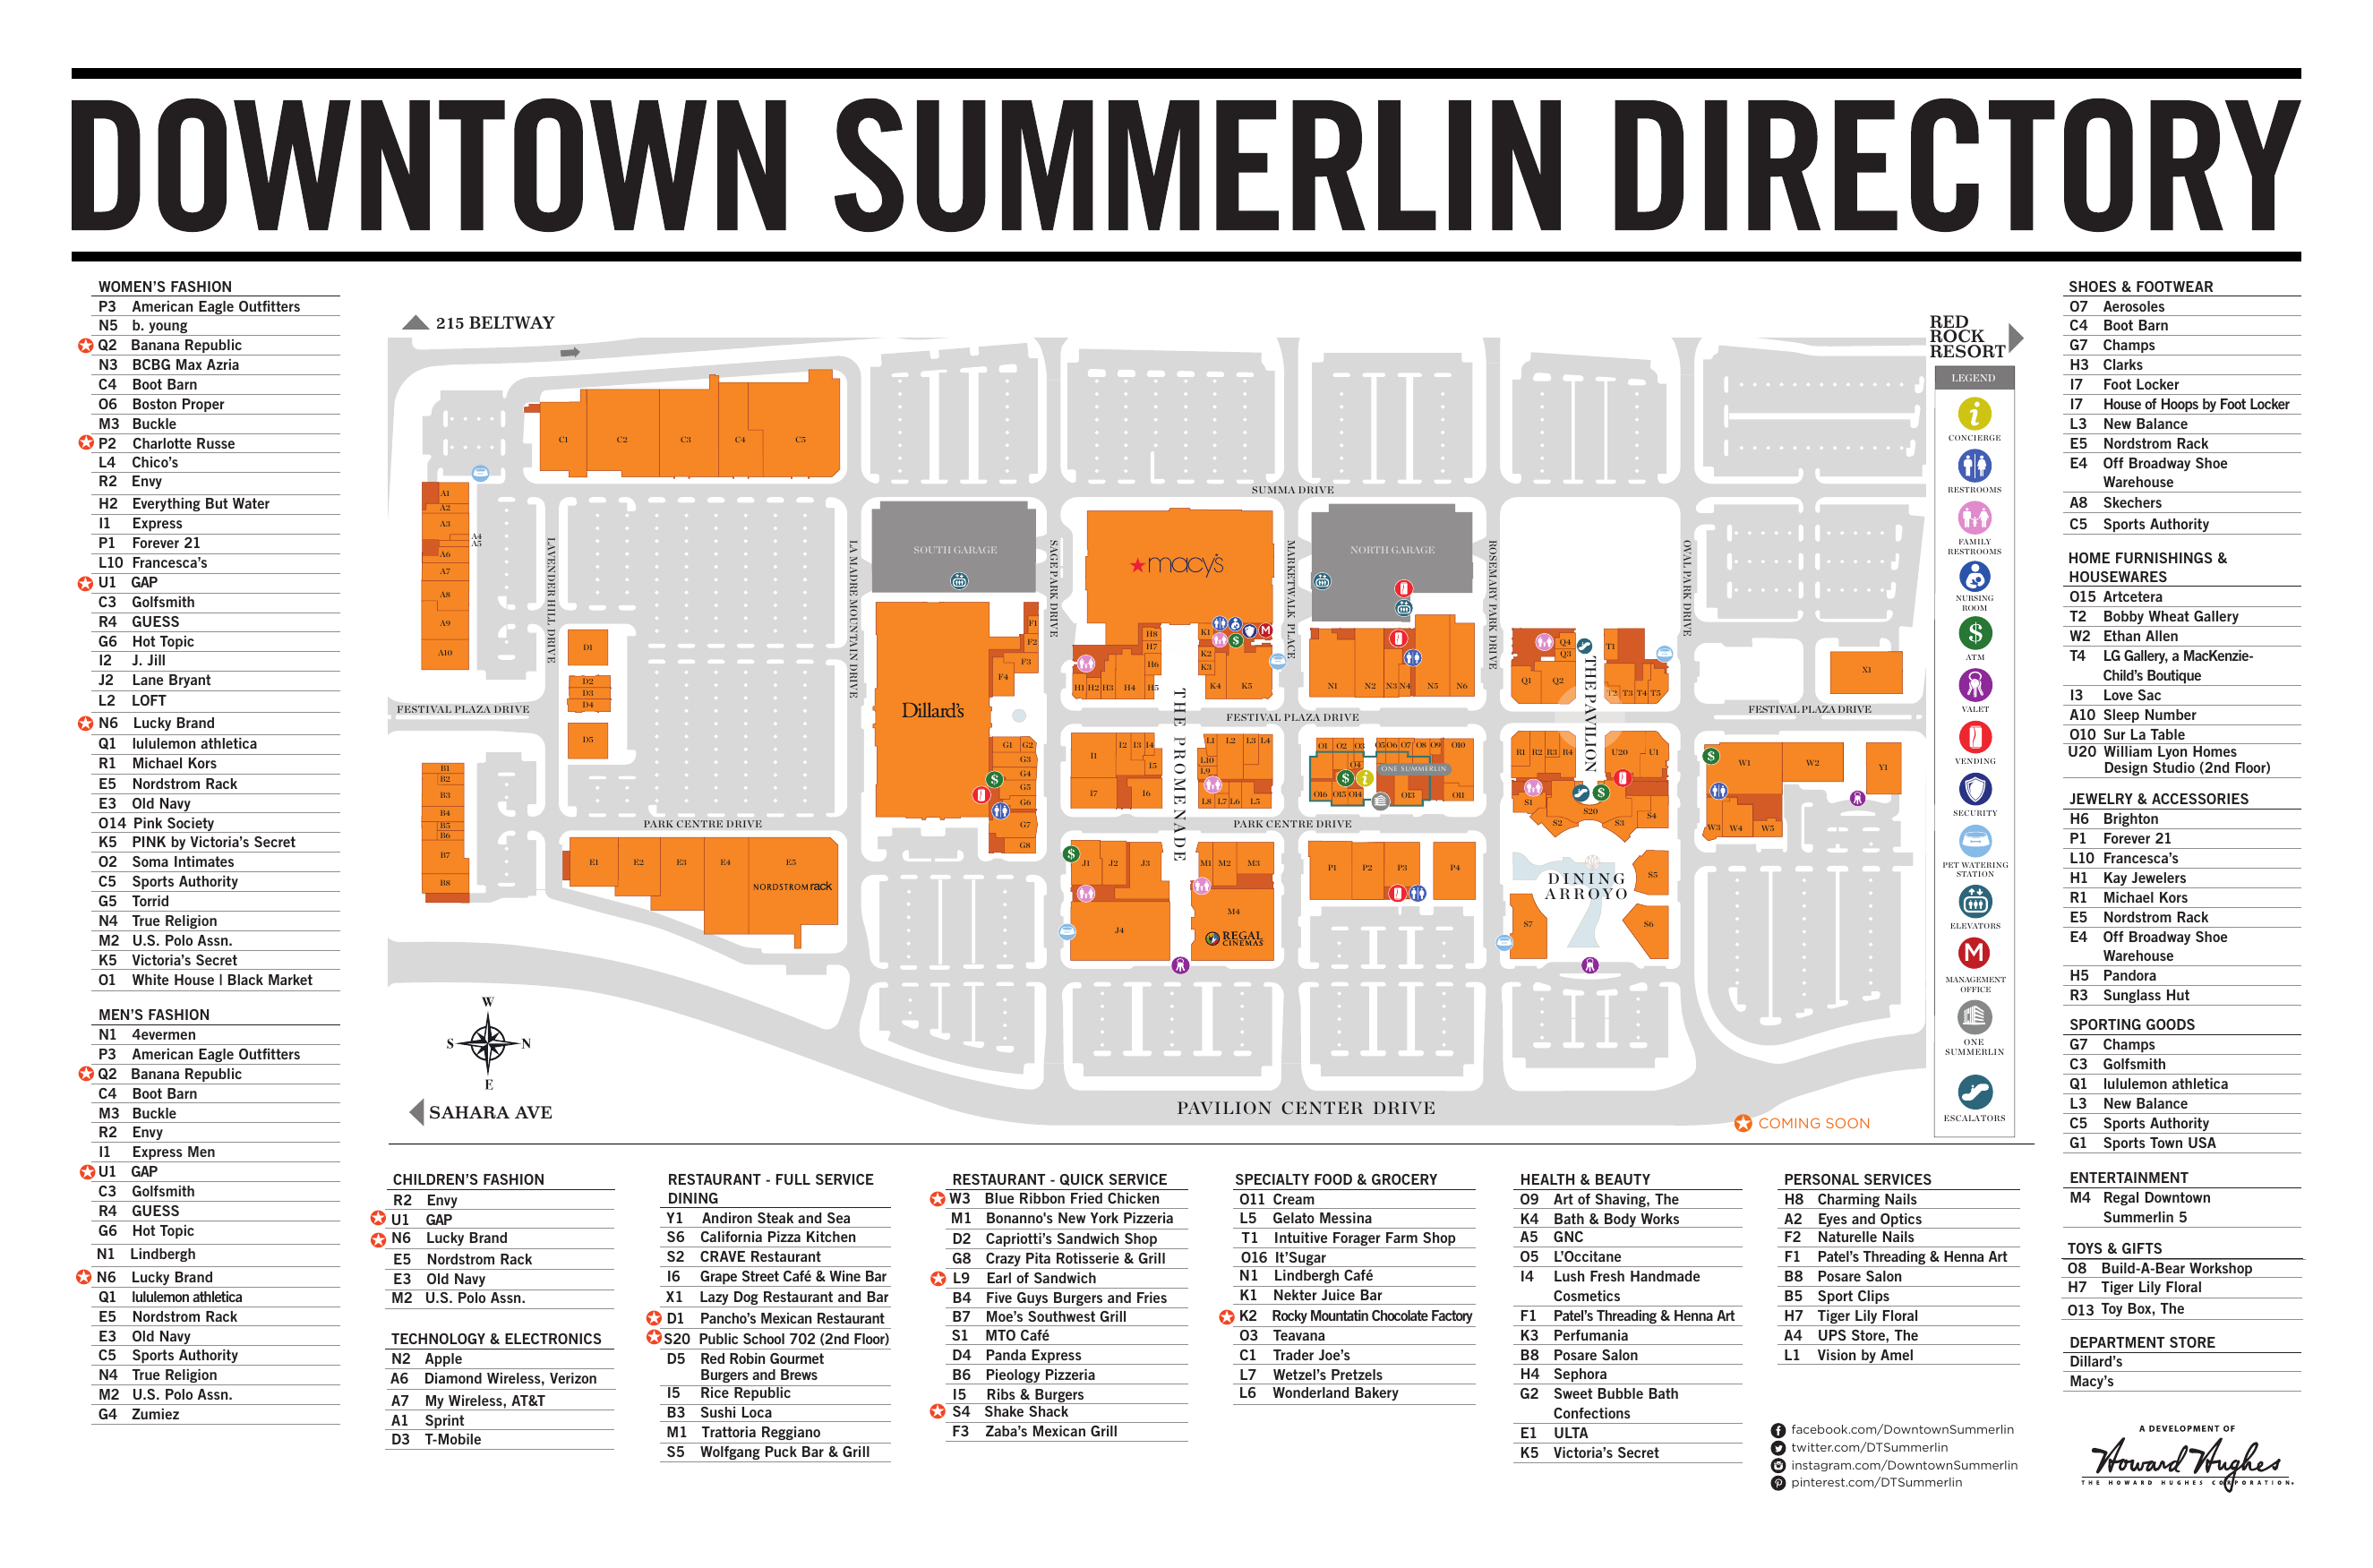 map of downtown summerlin View Map Downtown Summerlin Manualzz map of downtown summerlin